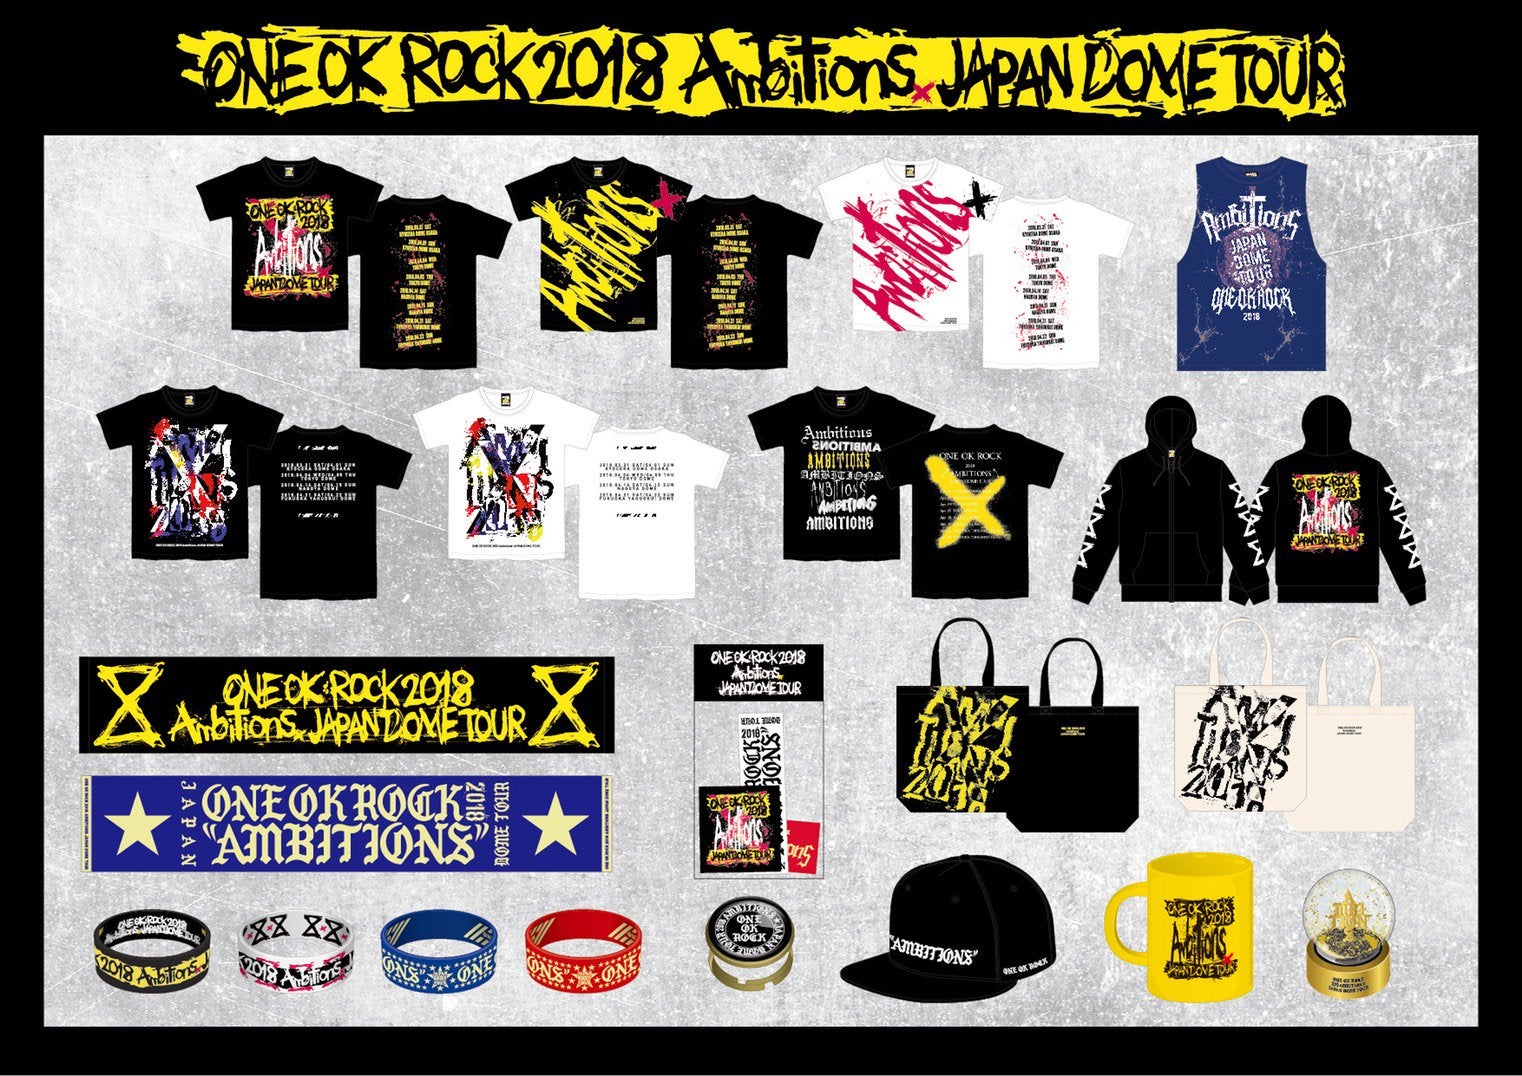 2018 AMBITIONS JAPAN DOME TOUR GOODS 先行通信販売発表 